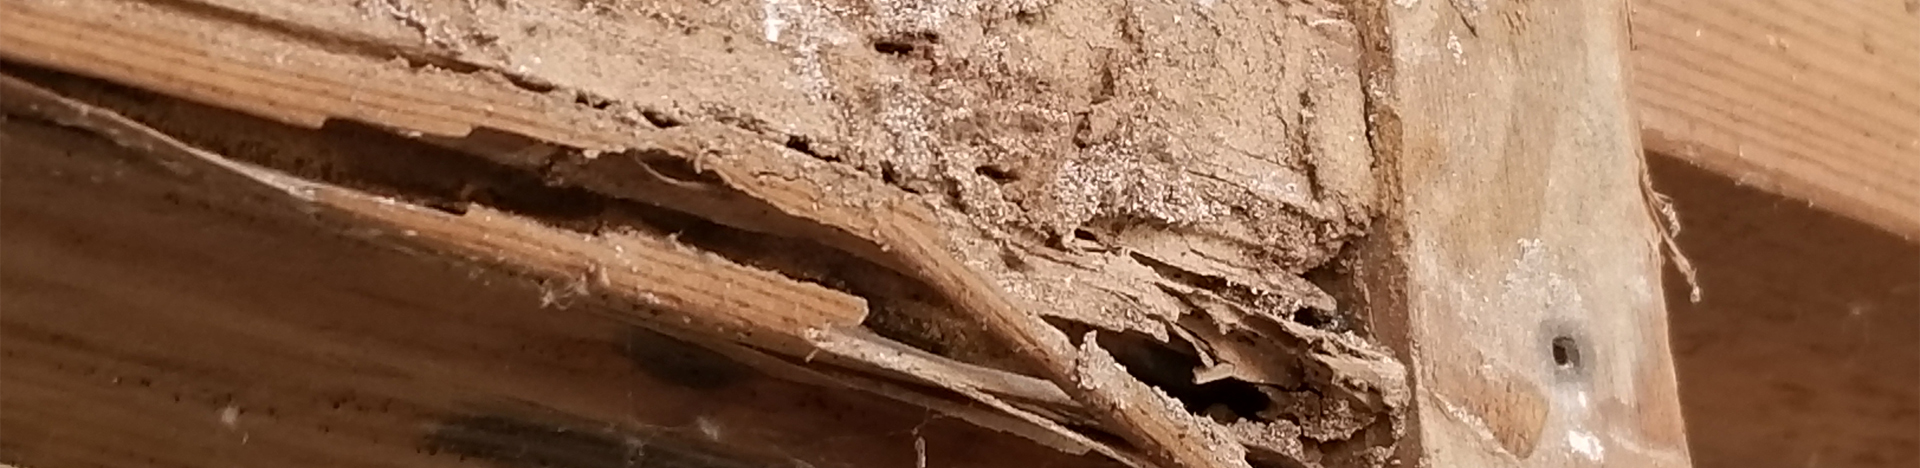 Questions about Termites in Phoenix